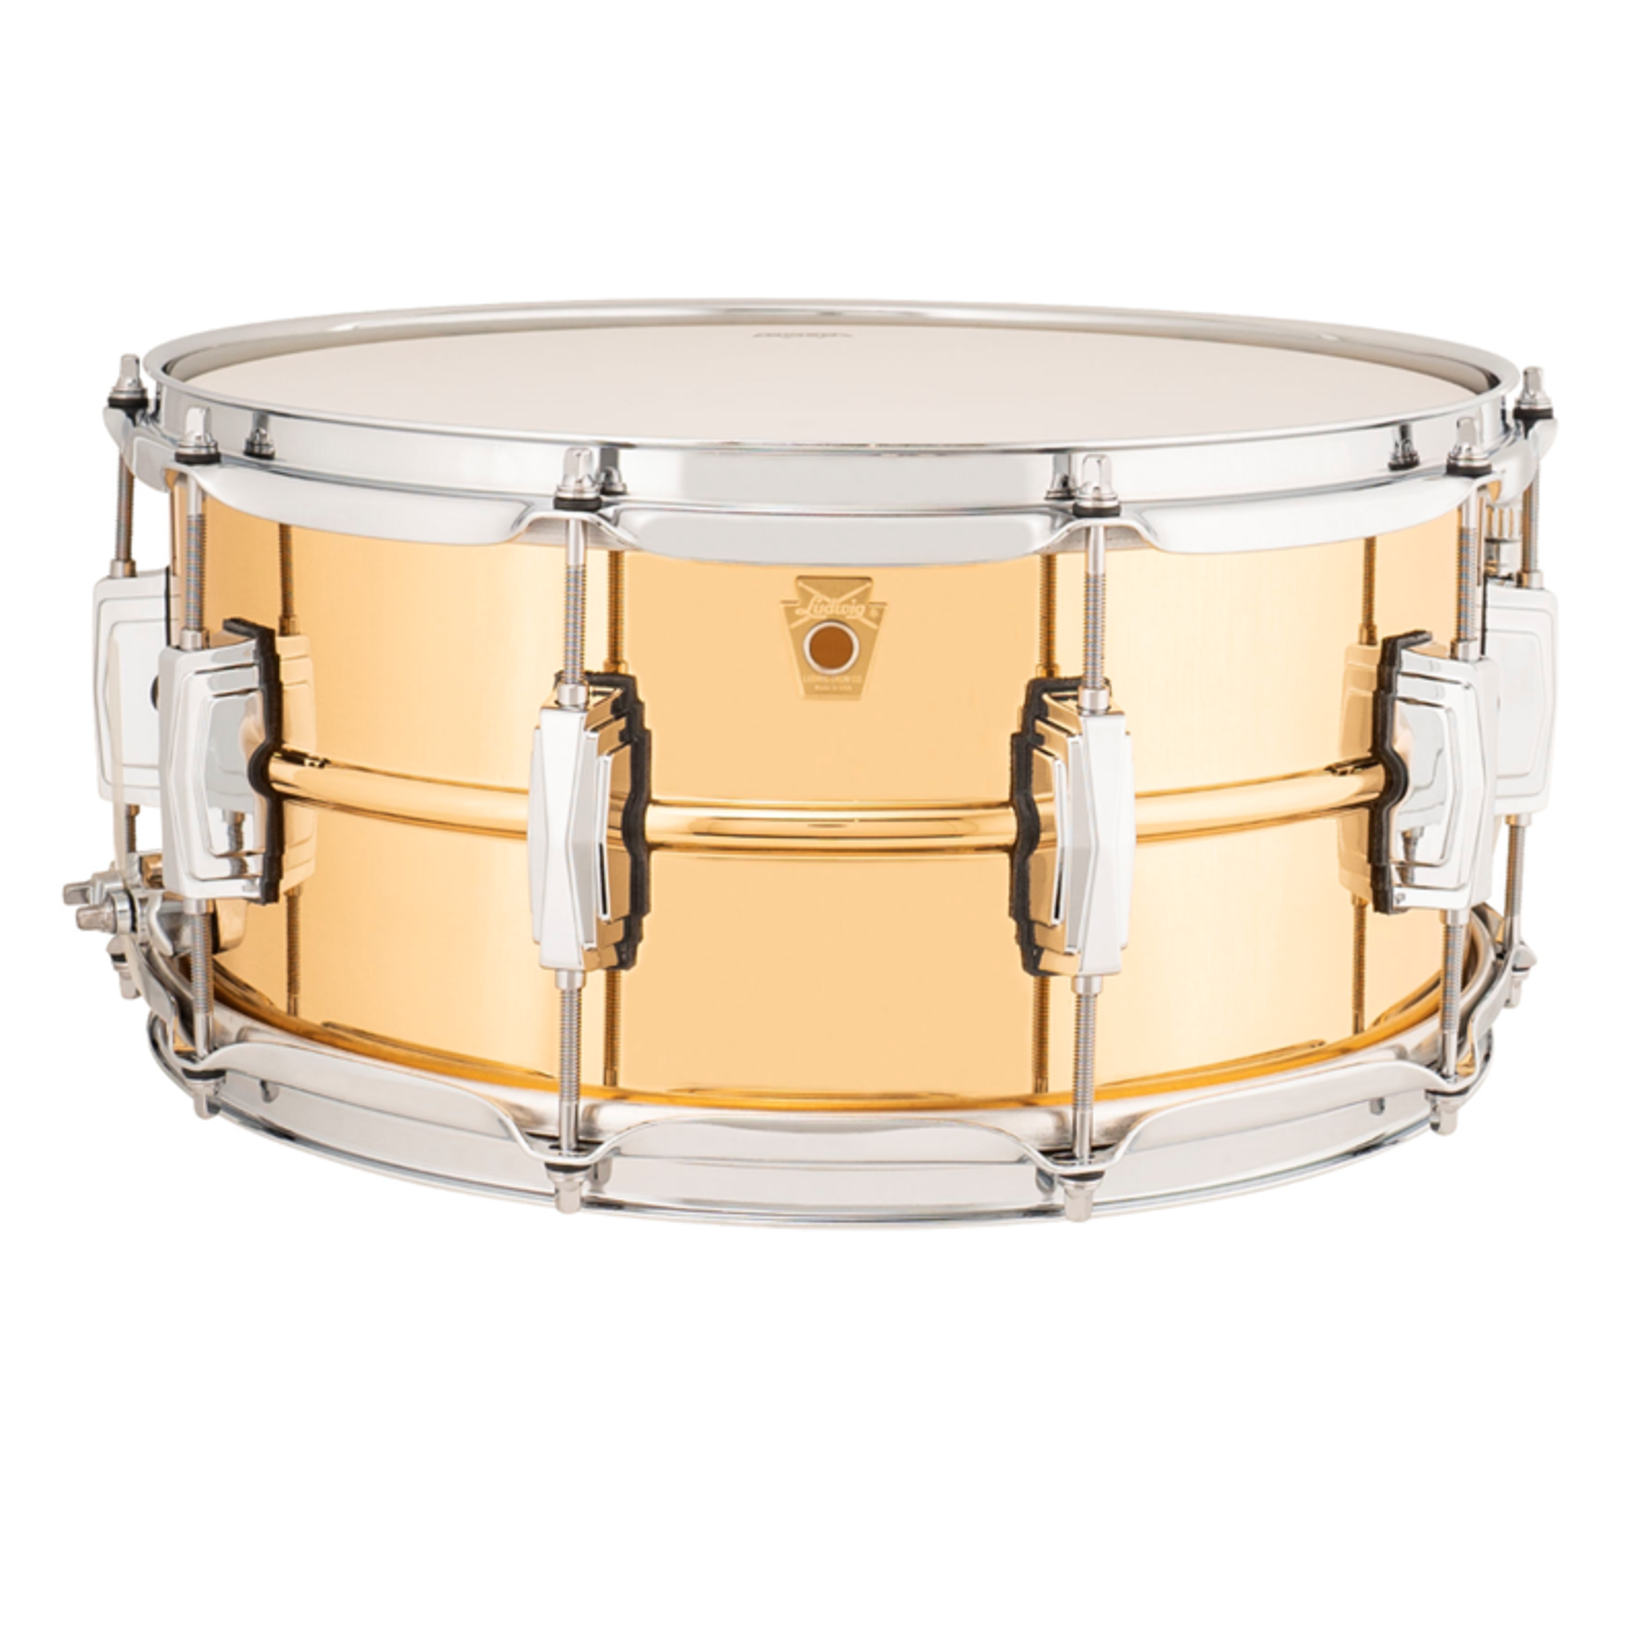 Ludwig Ludwig 6.5x14" Bronze Phonic Snare Drum LB552